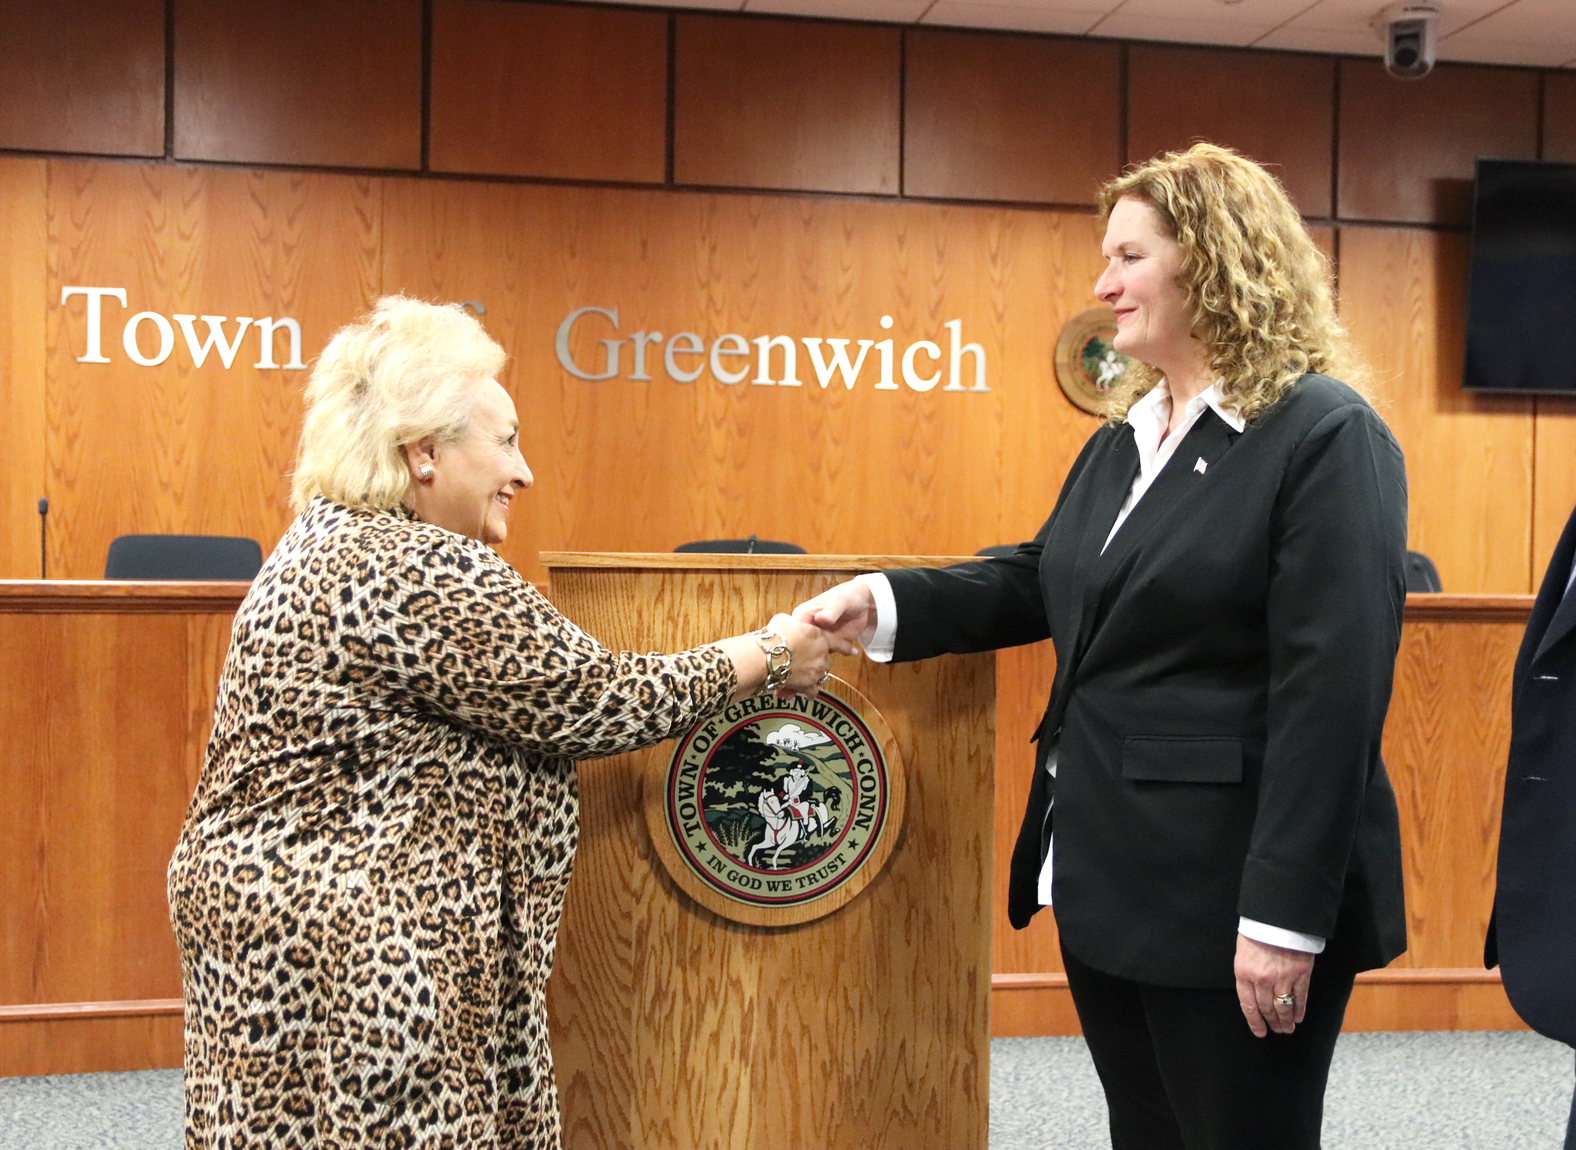 Heather Smeriglio was sworn in as Tax Collector by Town Clerk Carmella Budkins. Dec 19, 2019 Photo: Leslie Yager